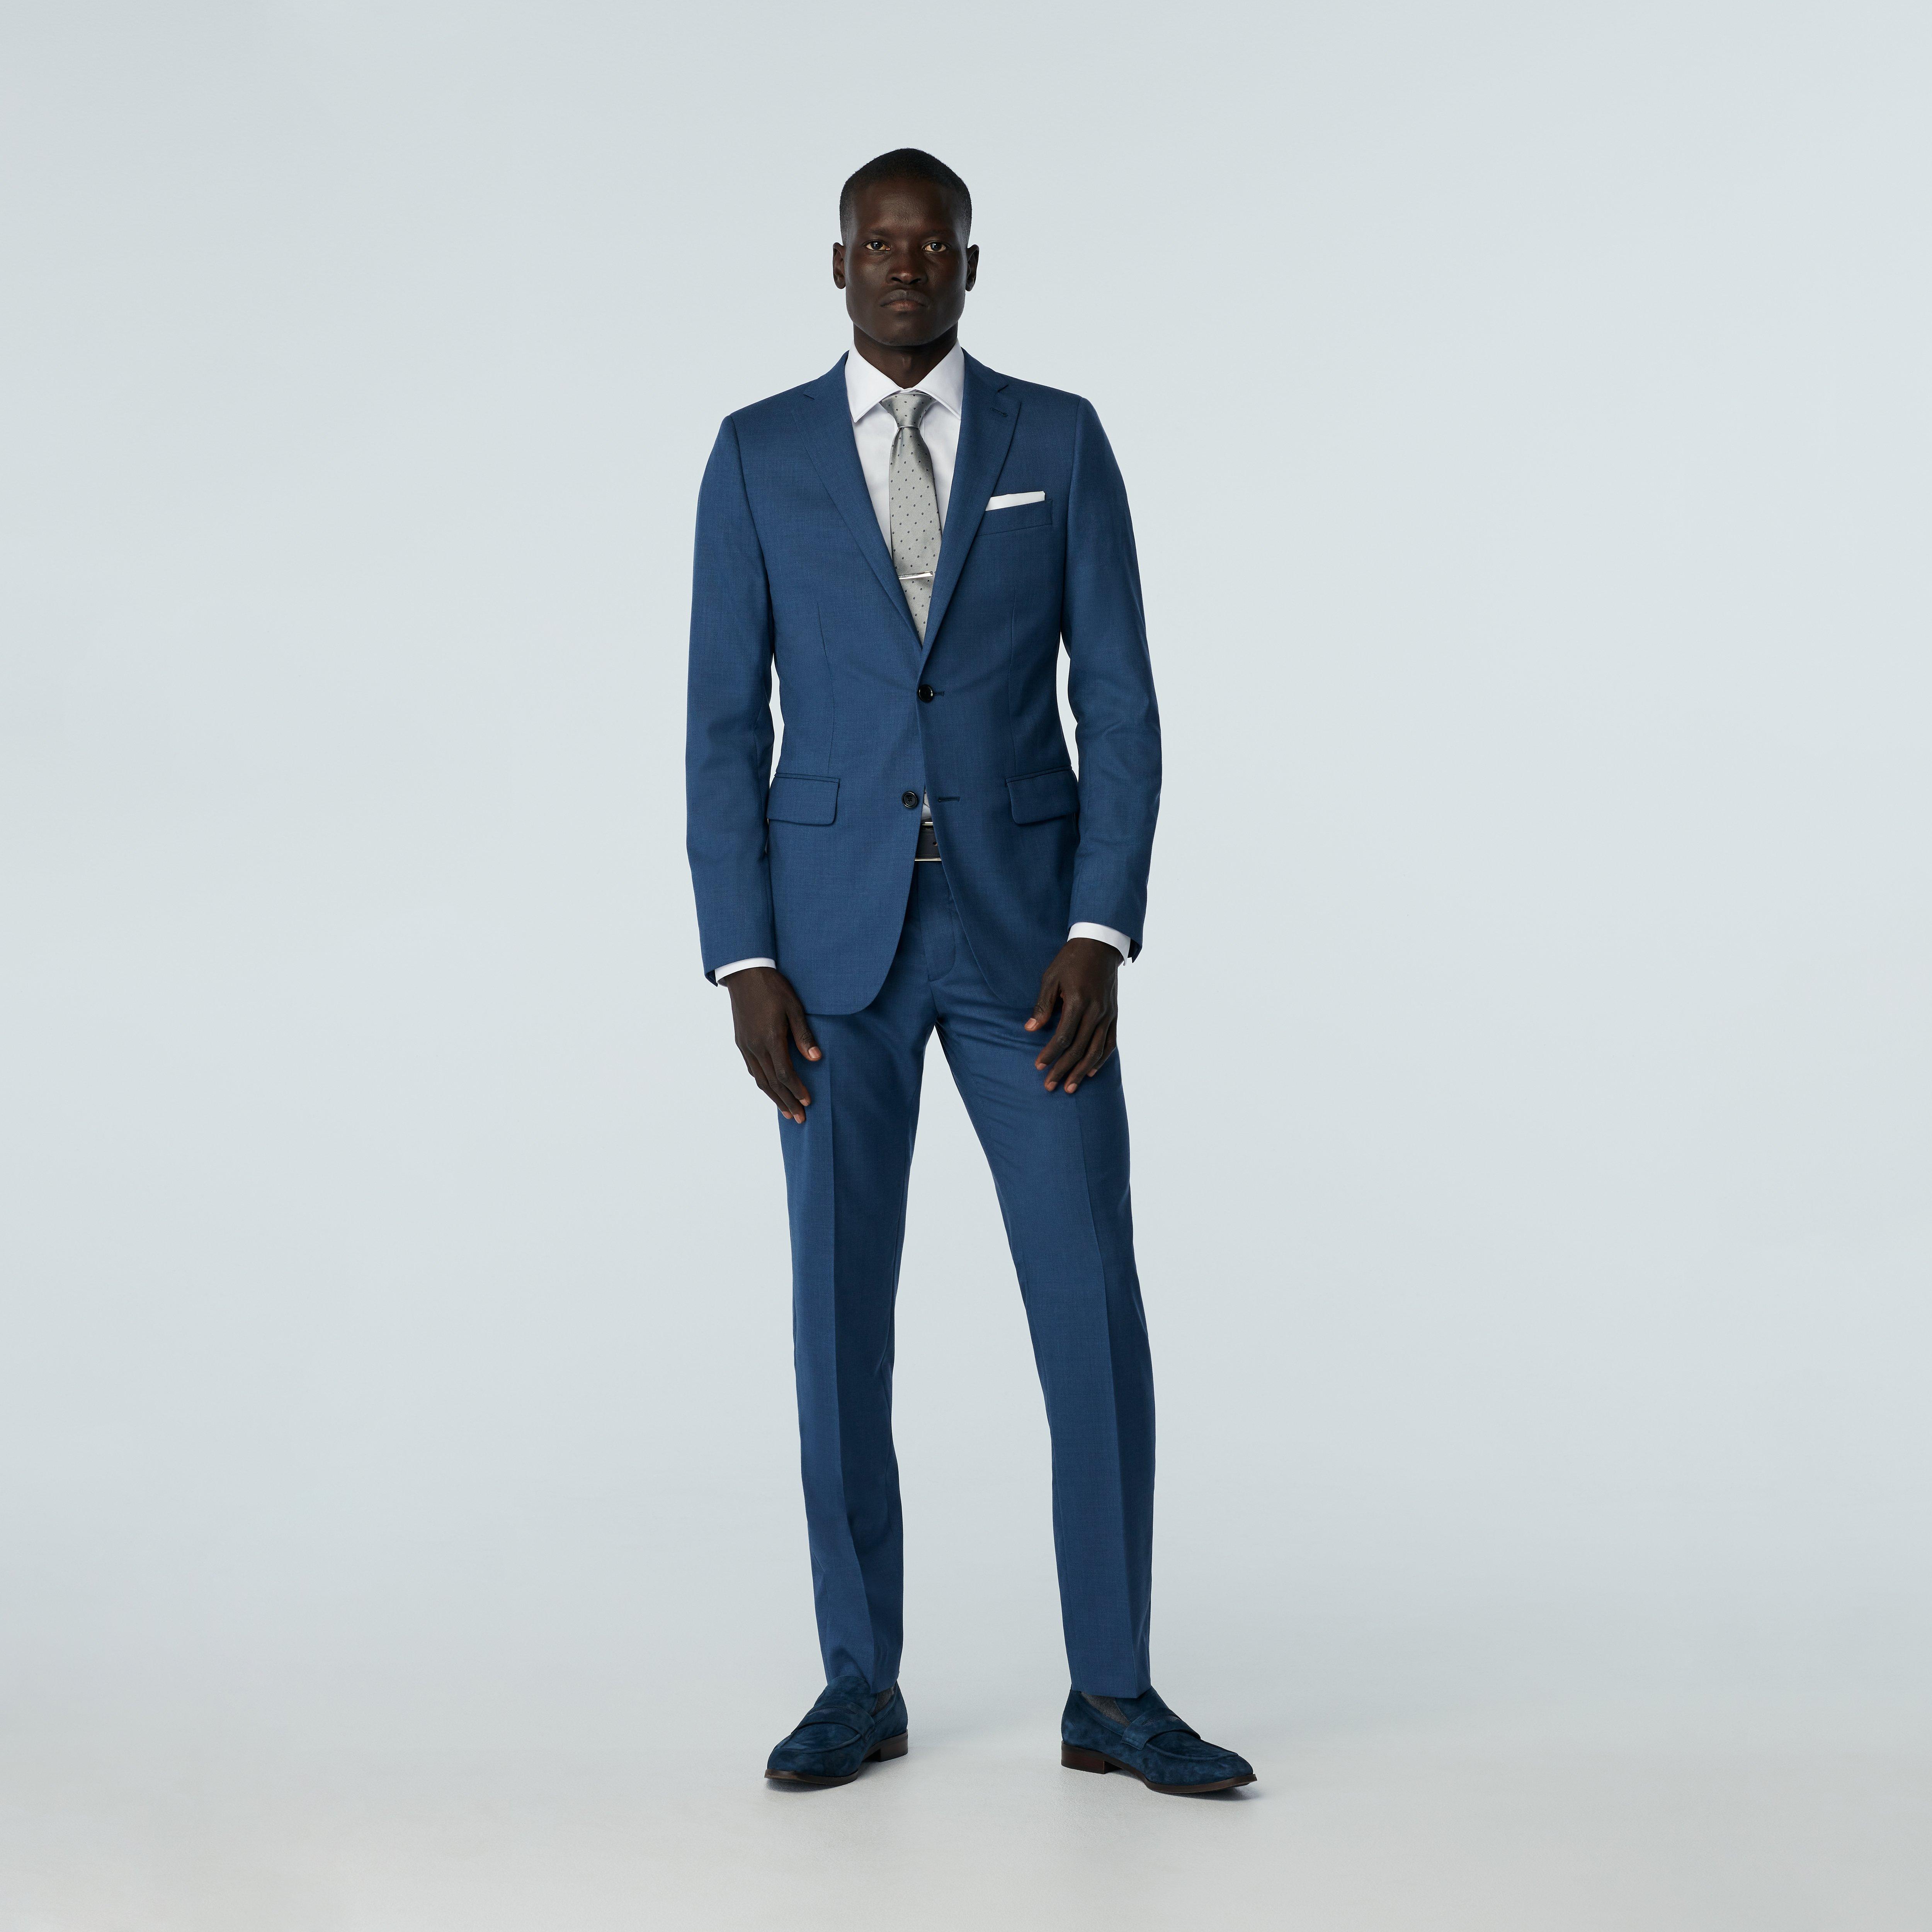 Men's Suits | Custom Made To Measure Suits | INDOCHINO